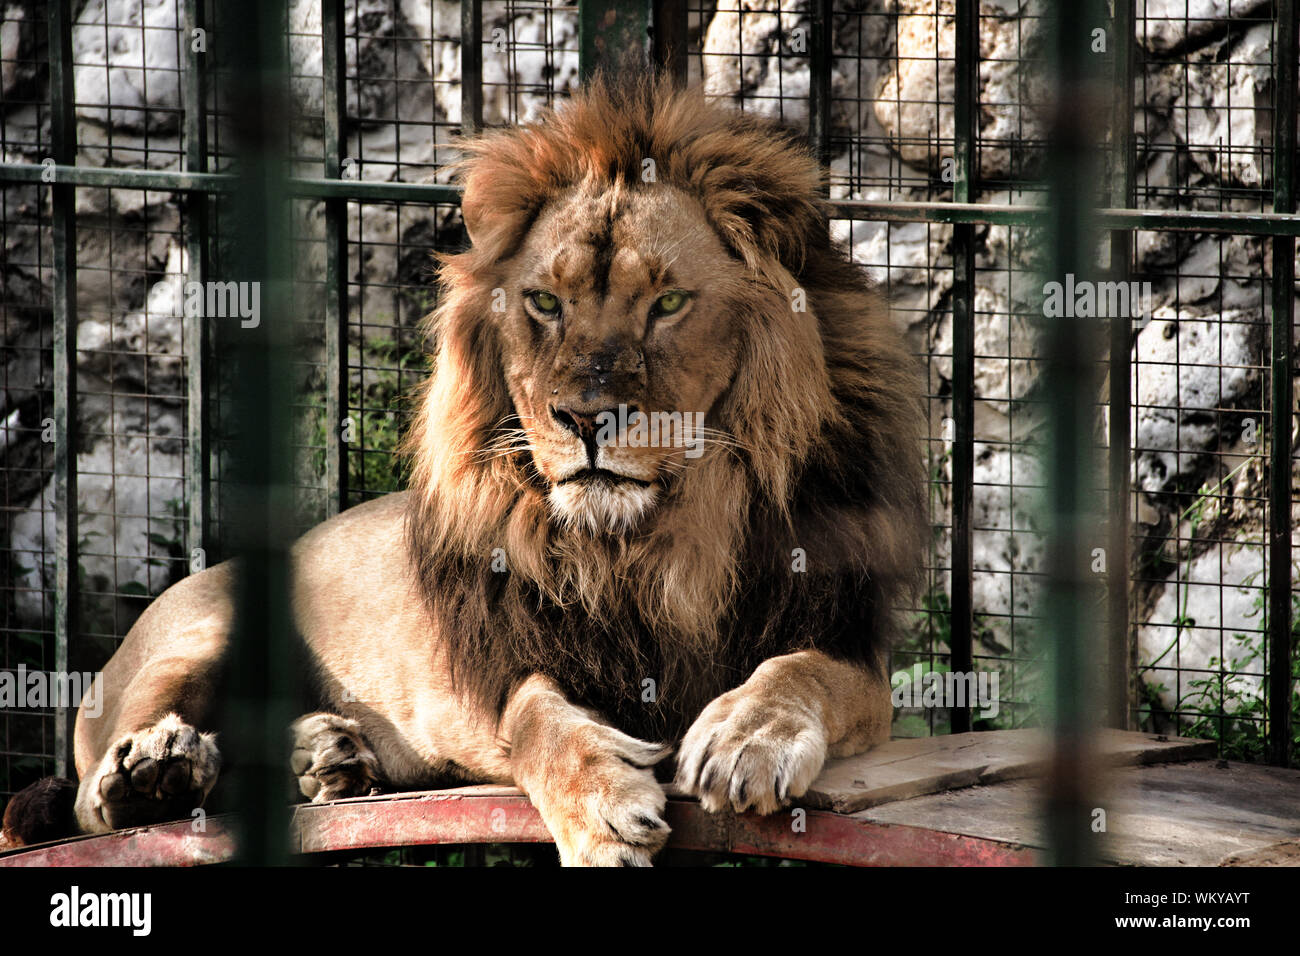 Lion In Cage Stock Photo - Alamy